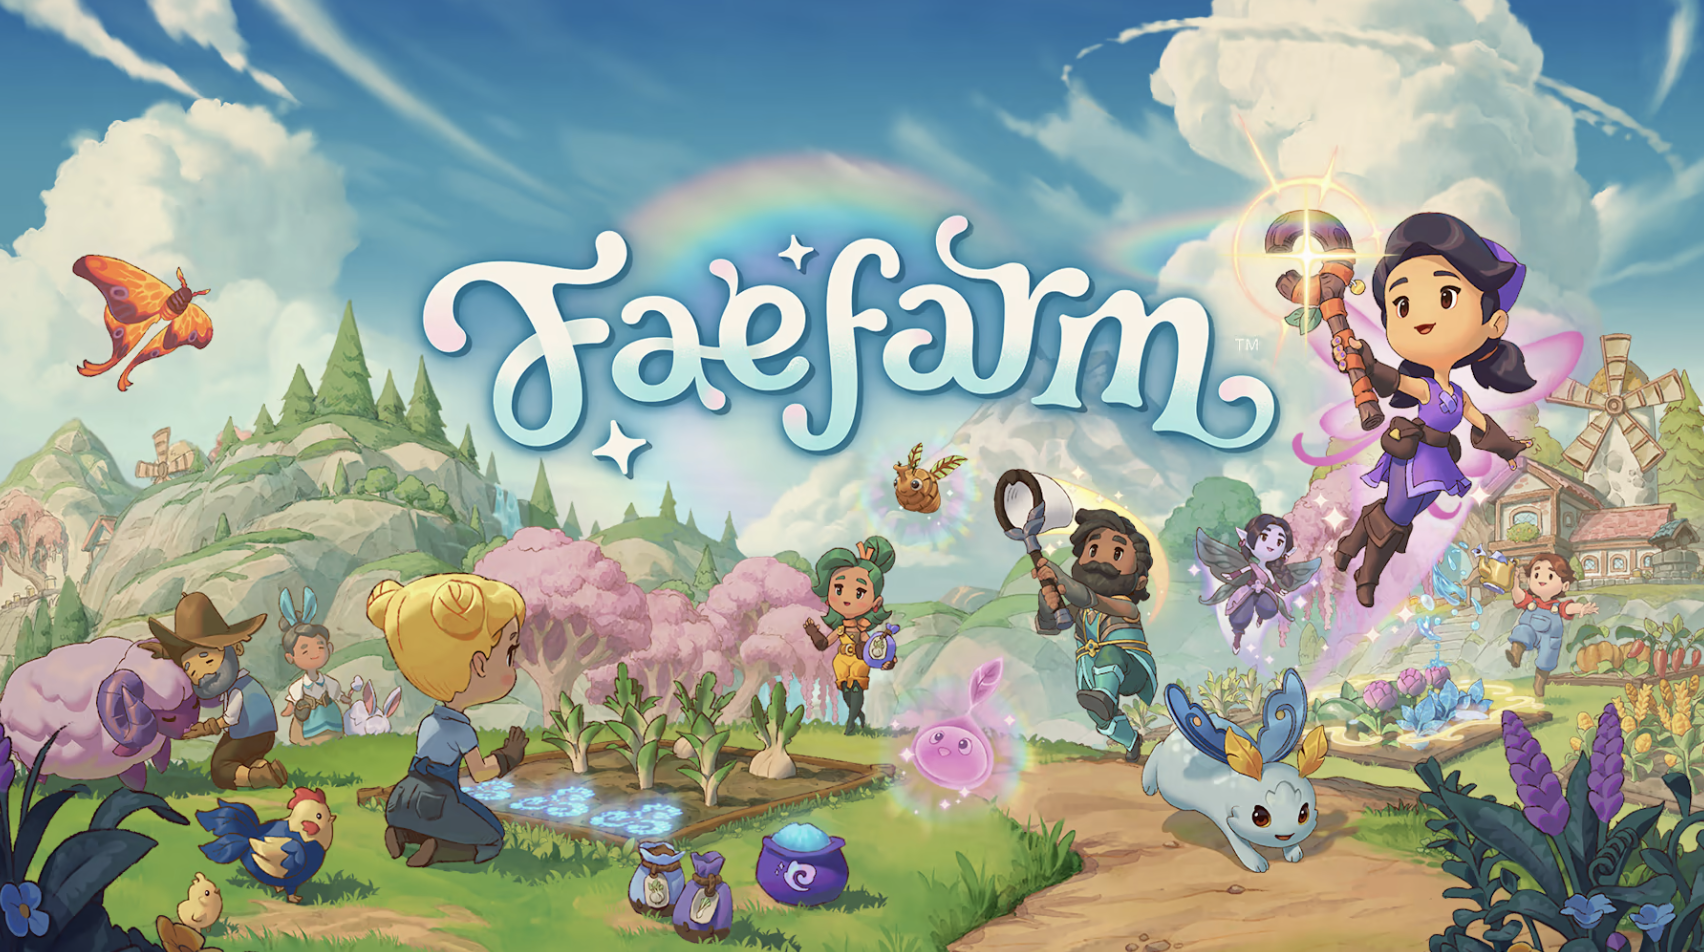 SwitchArcade Round-Up: Reviews Featuring ‘Fae Farm’ and ’30XX’, Plus the Latest Releases and Sales